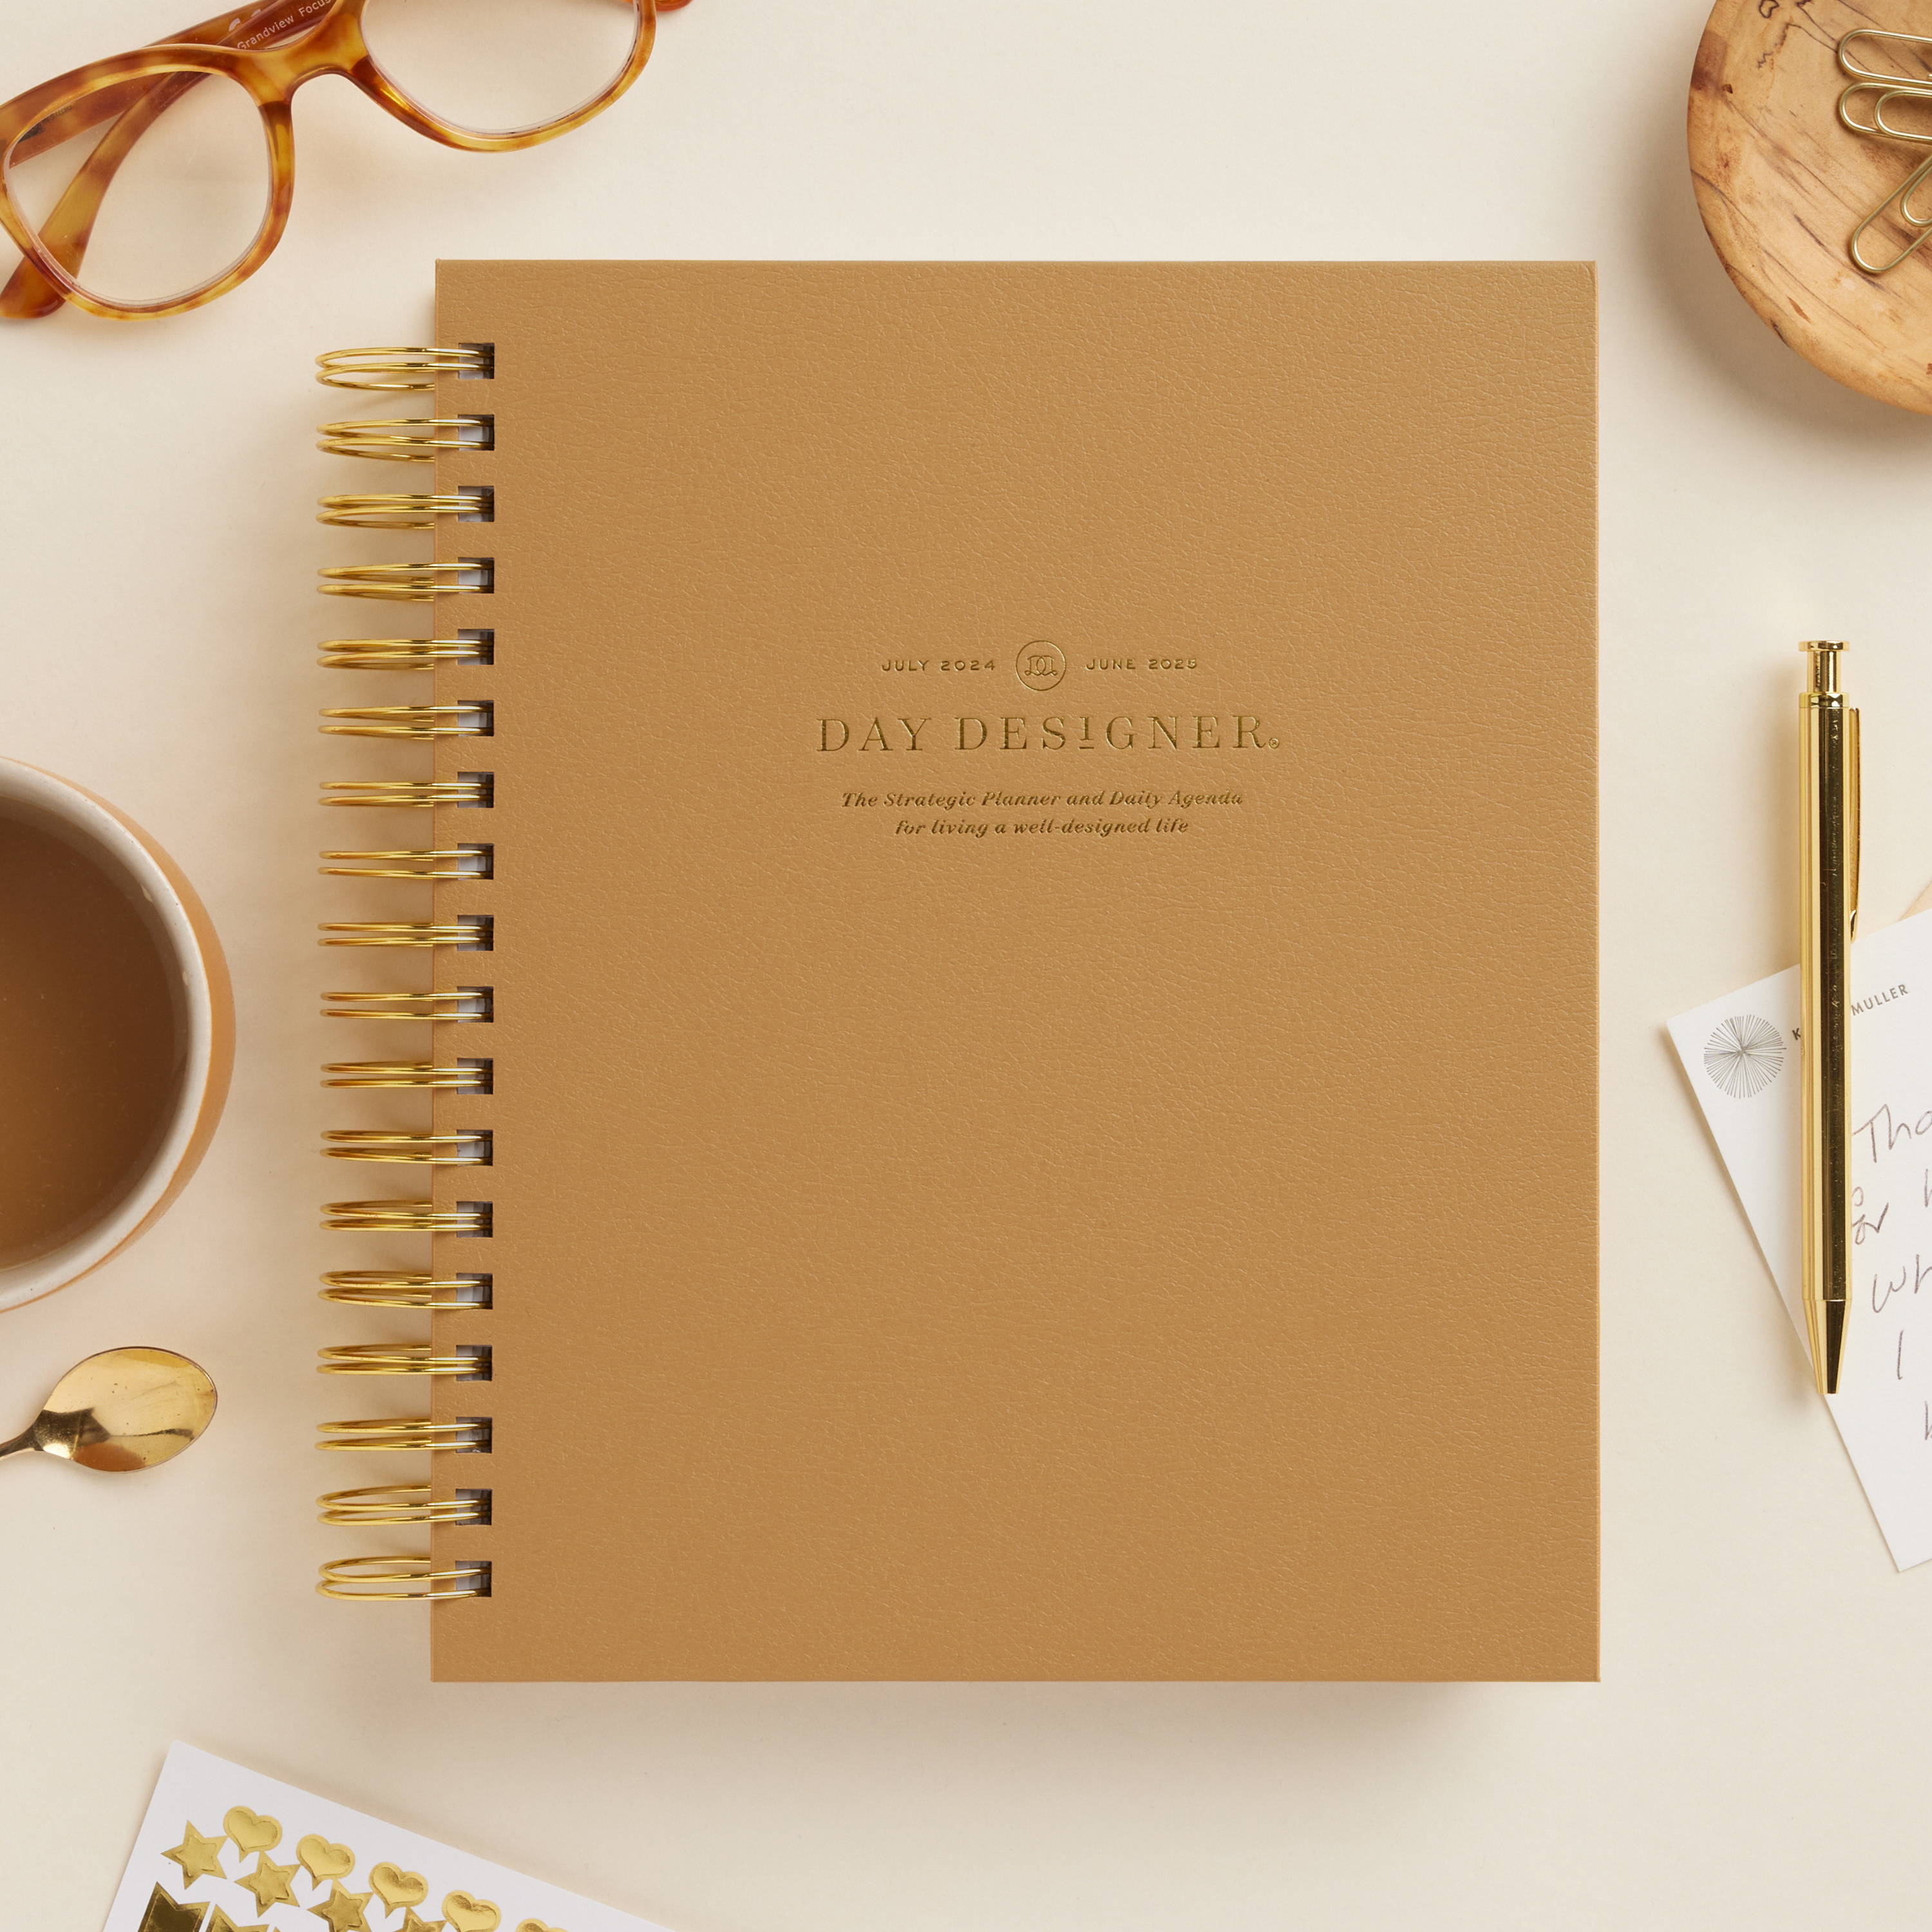 caramel colored closed book planner on beige background